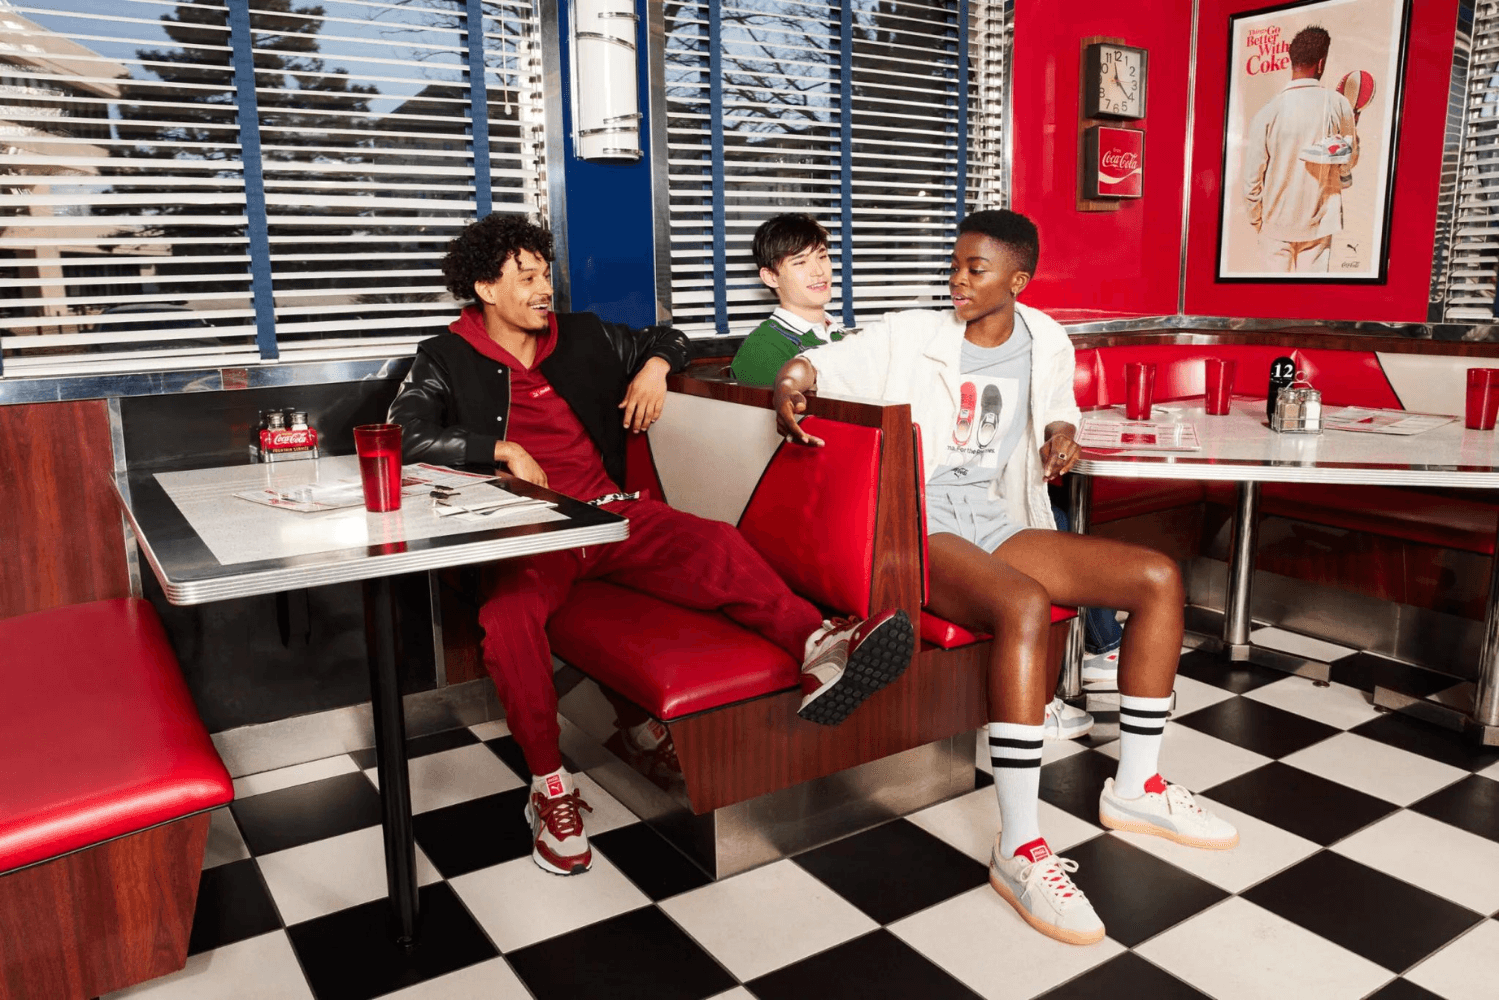 The PUMA x Coca-Cola collection is available now